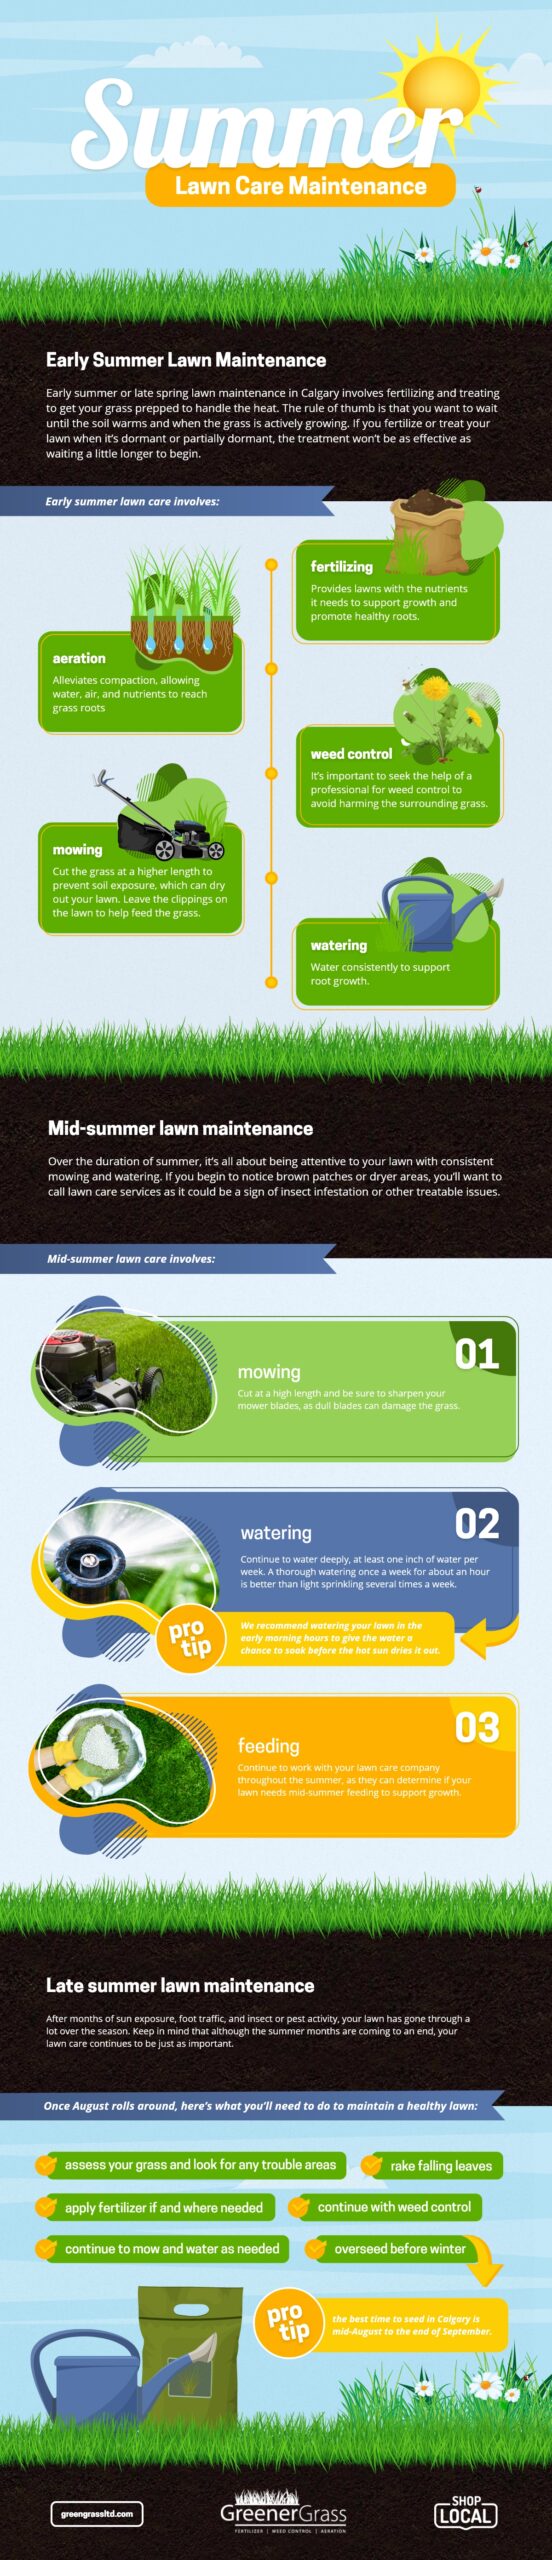 summer lawn care guide infographic